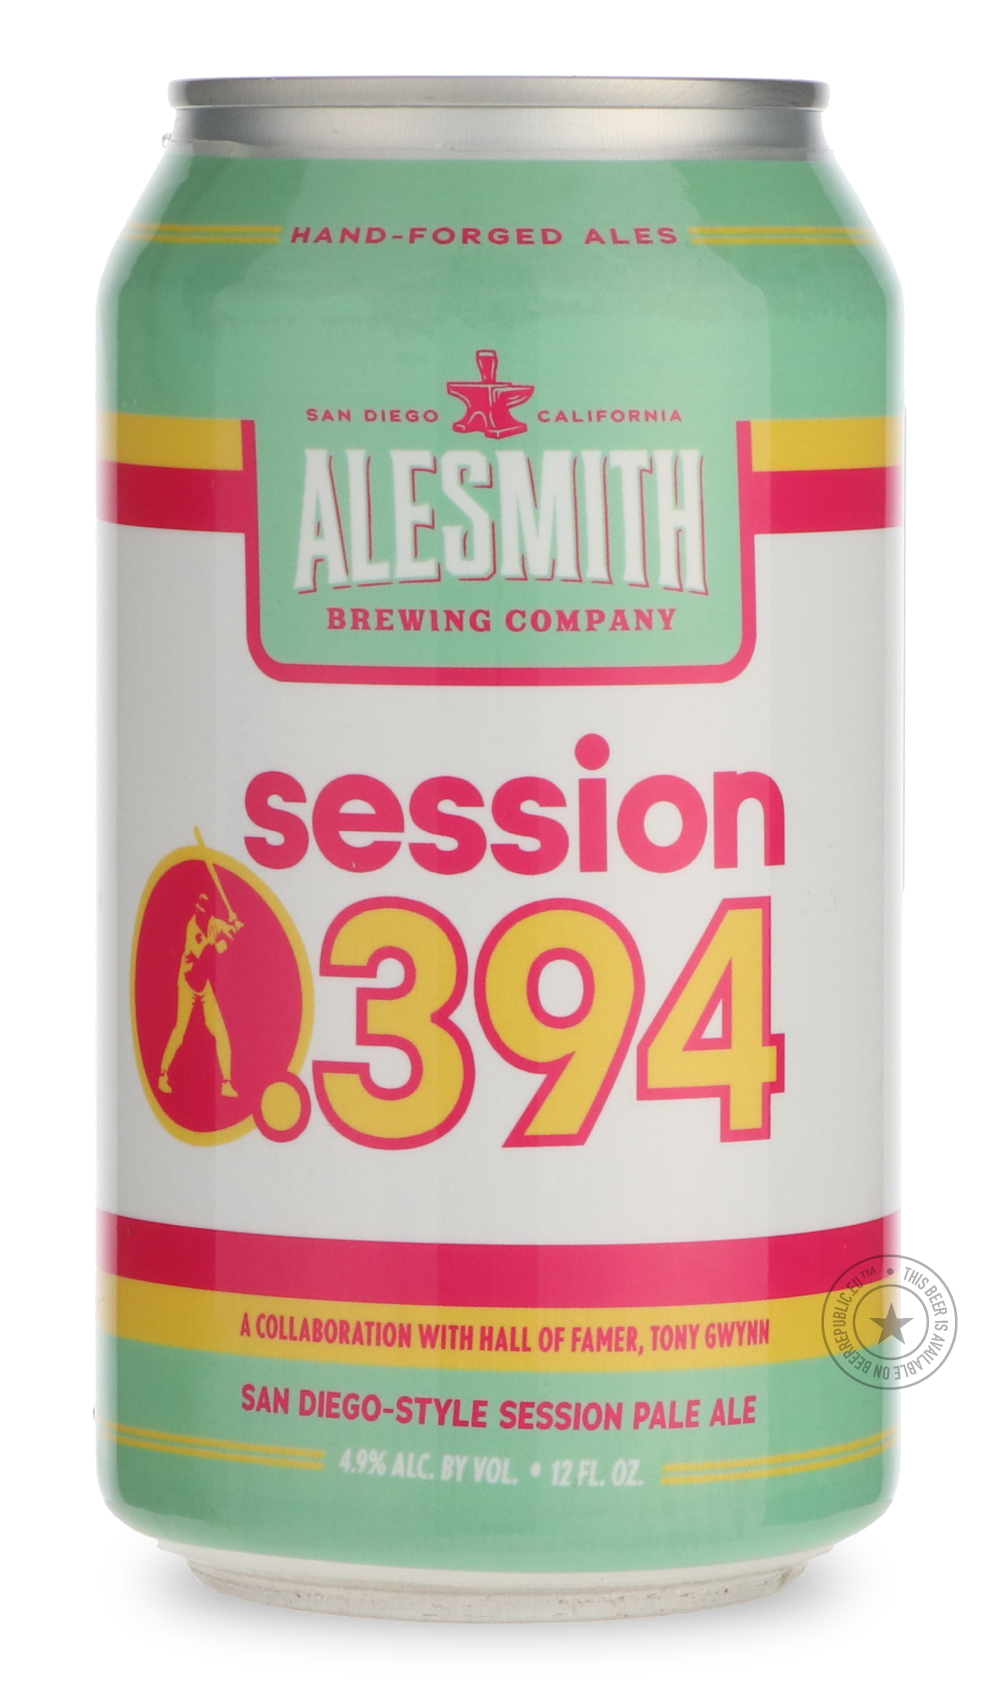 -AleSmith- Session .394-Pale- Only @ Beer Republic - The best online beer store for American & Canadian craft beer - Buy beer online from the USA and Canada - Bier online kopen - Amerikaans bier kopen - Craft beer store - Craft beer kopen - Amerikanisch bier kaufen - Bier online kaufen - Acheter biere online - IPA - Stout - Porter - New England IPA - Hazy IPA - Imperial Stout - Barrel Aged - Barrel Aged Imperial Stout - Brown - Dark beer - Blond - Blonde - Pilsner - Lager - Wheat - Weizen - Amber - Barley W